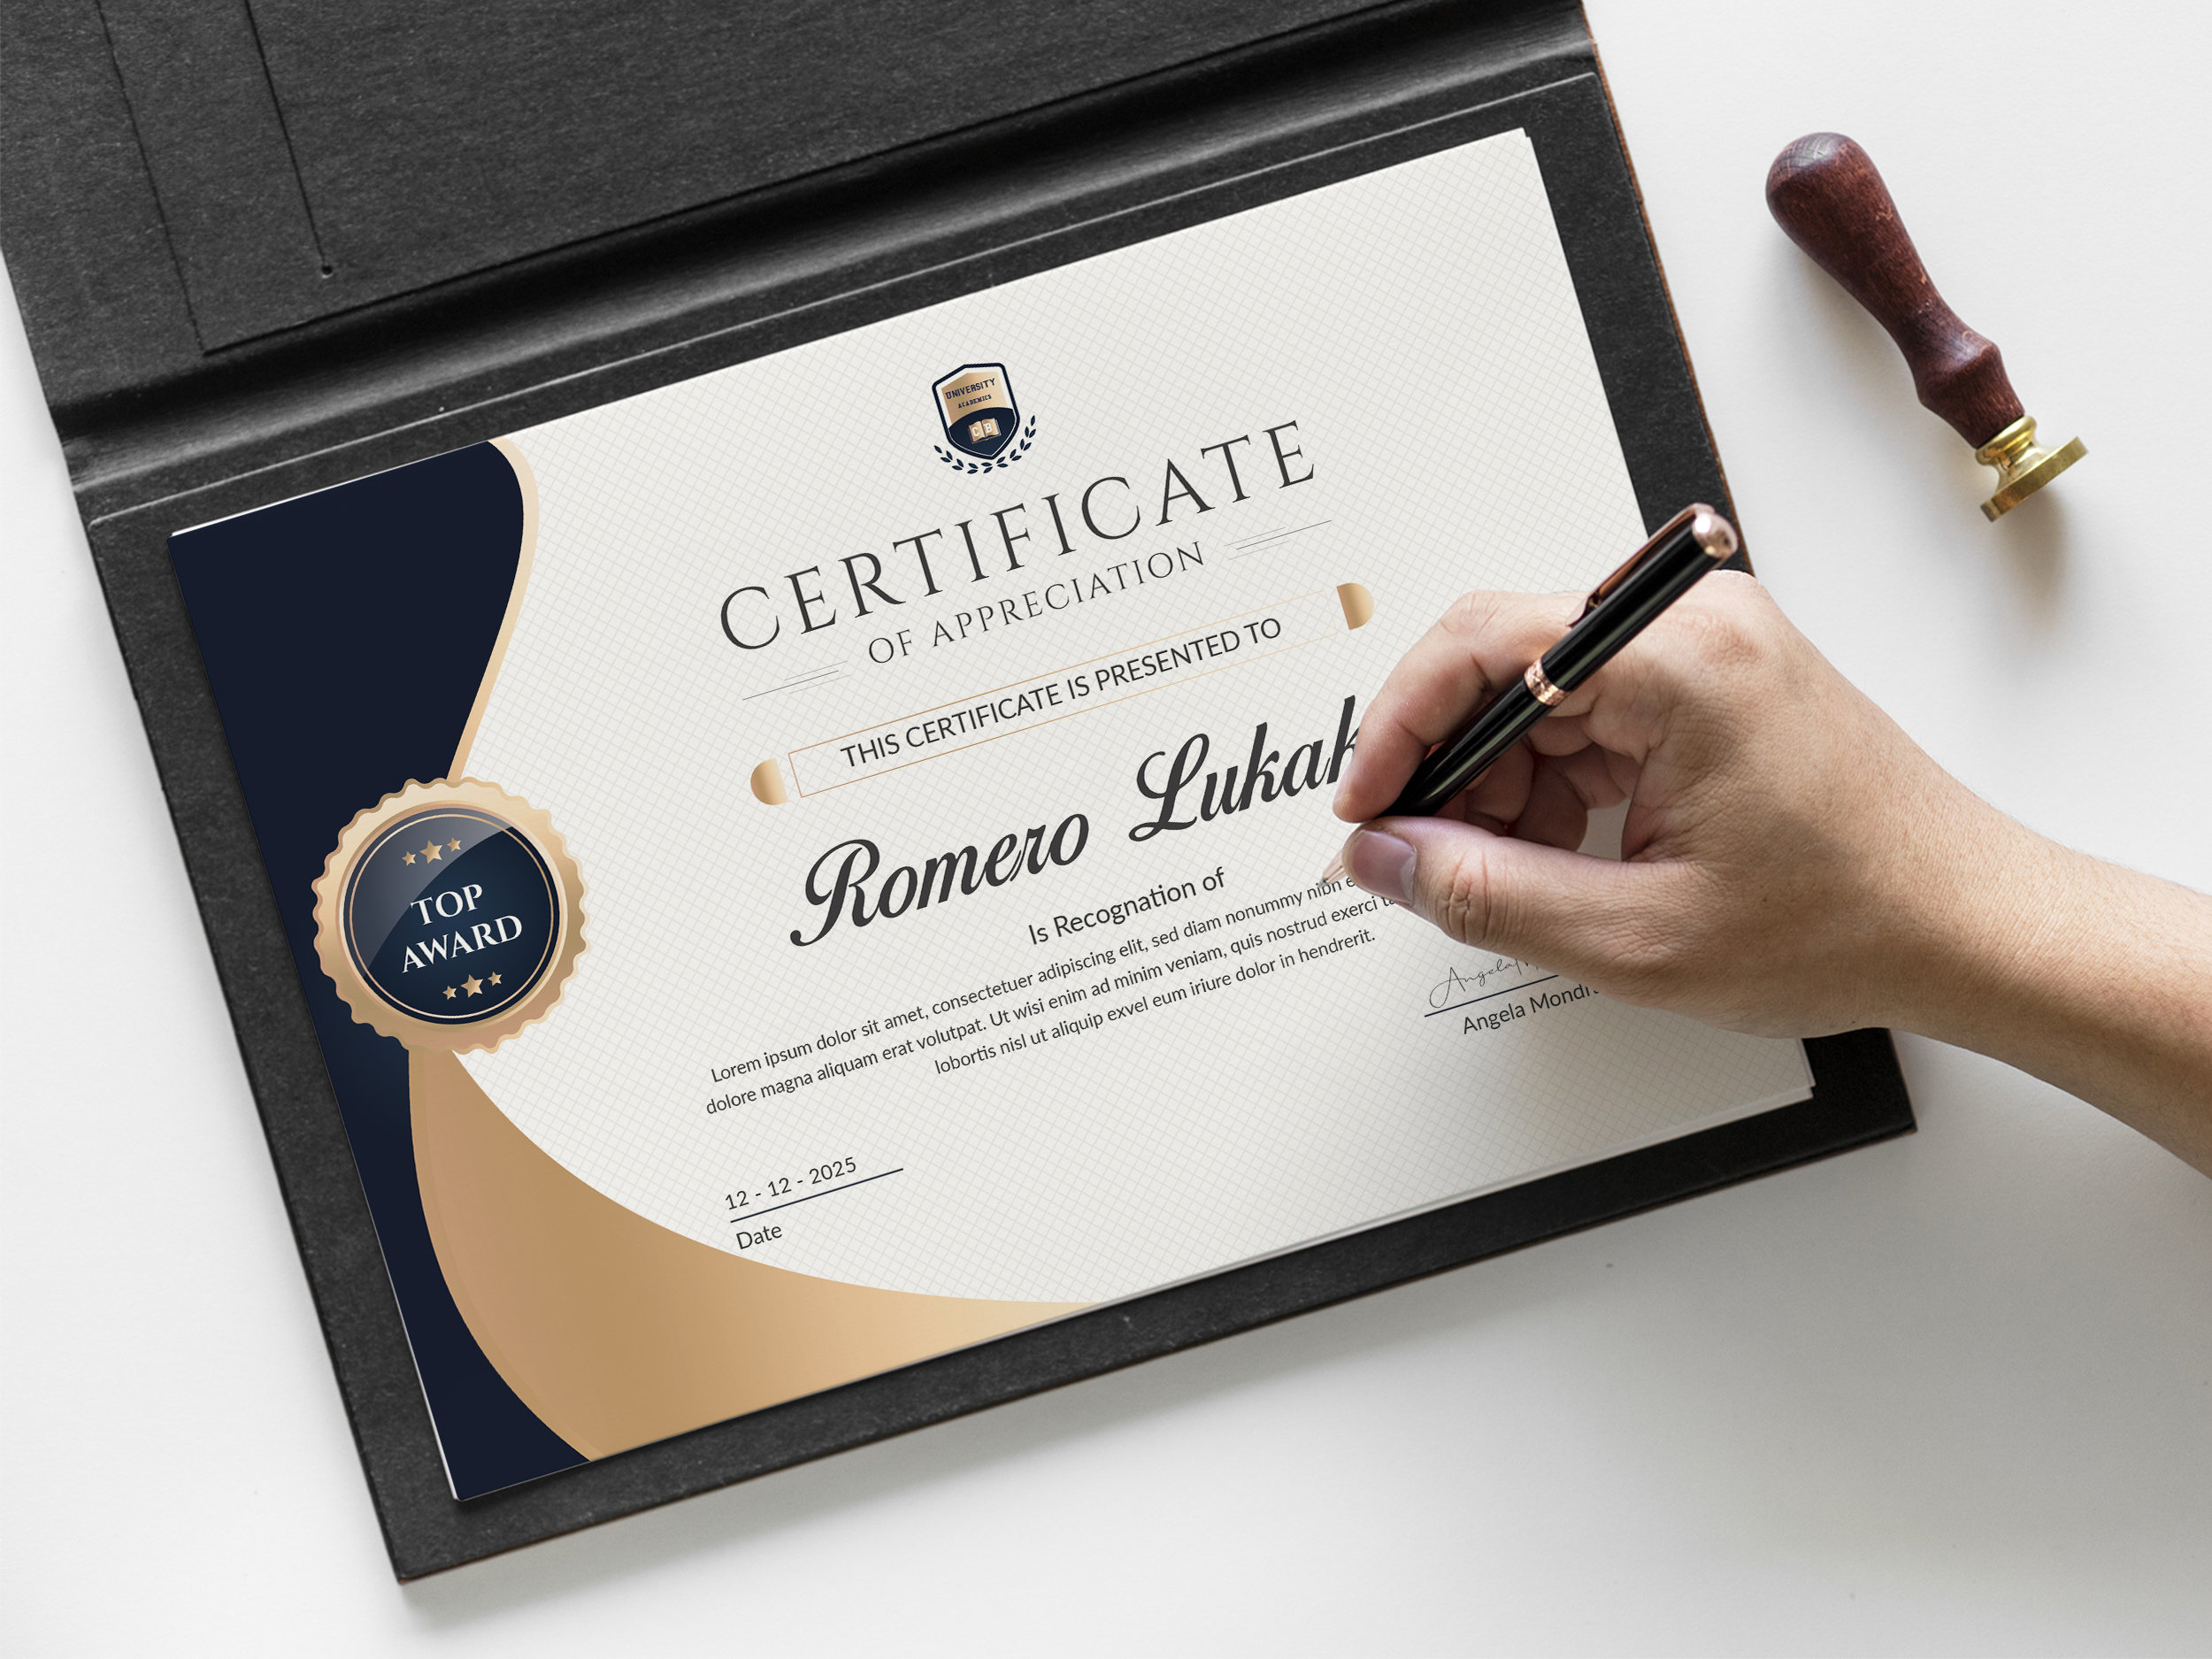 Certificate Template Word Certificate of Completion - Etsy Schweiz Pertaining To Borderless Certificate Templates